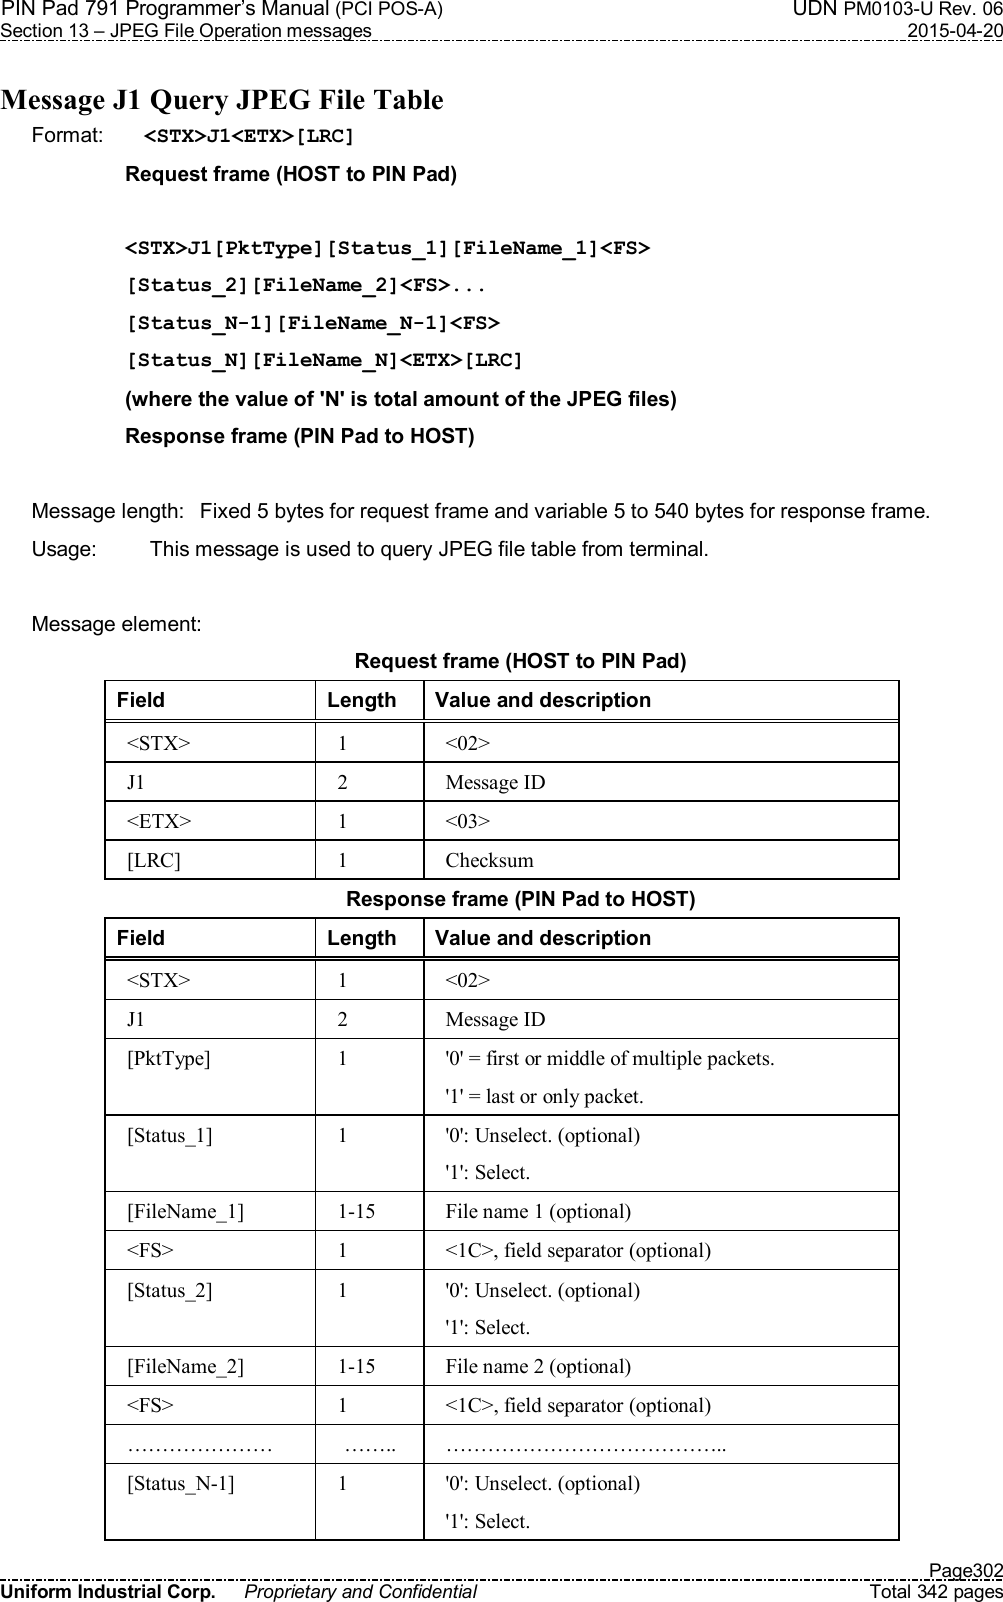 PIN Pad 791 Programmer’s Manual (PCI POS-A)  UDN PM0103-U Rev. 06 Section 13 – JPEG File Operation messages  2015-04-20   Page302 Uniform Industrial Corp.  Proprietary and Confidential  Total 342 pages  Message J1 Query JPEG File Table Format:  &lt;STX&gt;J1&lt;ETX&gt;[LRC] Request frame (HOST to PIN Pad)  &lt;STX&gt;J1[PktType][Status_1][FileName_1]&lt;FS&gt; [Status_2][FileName_2]&lt;FS&gt;... [Status_N-1][FileName_N-1]&lt;FS&gt; [Status_N][FileName_N]&lt;ETX&gt;[LRC] (where the value of &apos;N&apos; is total amount of the JPEG files) Response frame (PIN Pad to HOST)  Message length:  Fixed 5 bytes for request frame and variable 5 to 540 bytes for response frame. Usage:   This message is used to query JPEG file table from terminal.  Message element: Request frame (HOST to PIN Pad) Field  Length  Value and description &lt;STX&gt;  1  &lt;02&gt; J1  2  Message ID &lt;ETX&gt;  1  &lt;03&gt; [LRC]  1  Checksum Response frame (PIN Pad to HOST) Field  Length  Value and description &lt;STX&gt;  1  &lt;02&gt; J1  2  Message ID [PktType]  1  &apos;0&apos; = first or middle of multiple packets. &apos;1&apos; = last or only packet. [Status_1]  1  &apos;0&apos;: Unselect. (optional) &apos;1&apos;: Select. [FileName_1]  1-15  File name 1 (optional) &lt;FS&gt;  1  &lt;1C&gt;, field separator (optional) [Status_2]  1  &apos;0&apos;: Unselect. (optional) &apos;1&apos;: Select. [FileName_2]  1-15  File name 2 (optional) &lt;FS&gt;  1  &lt;1C&gt;, field separator (optional) …………………  ……..  ………………………………….. [Status_N-1]  1  &apos;0&apos;: Unselect. (optional) &apos;1&apos;: Select. 